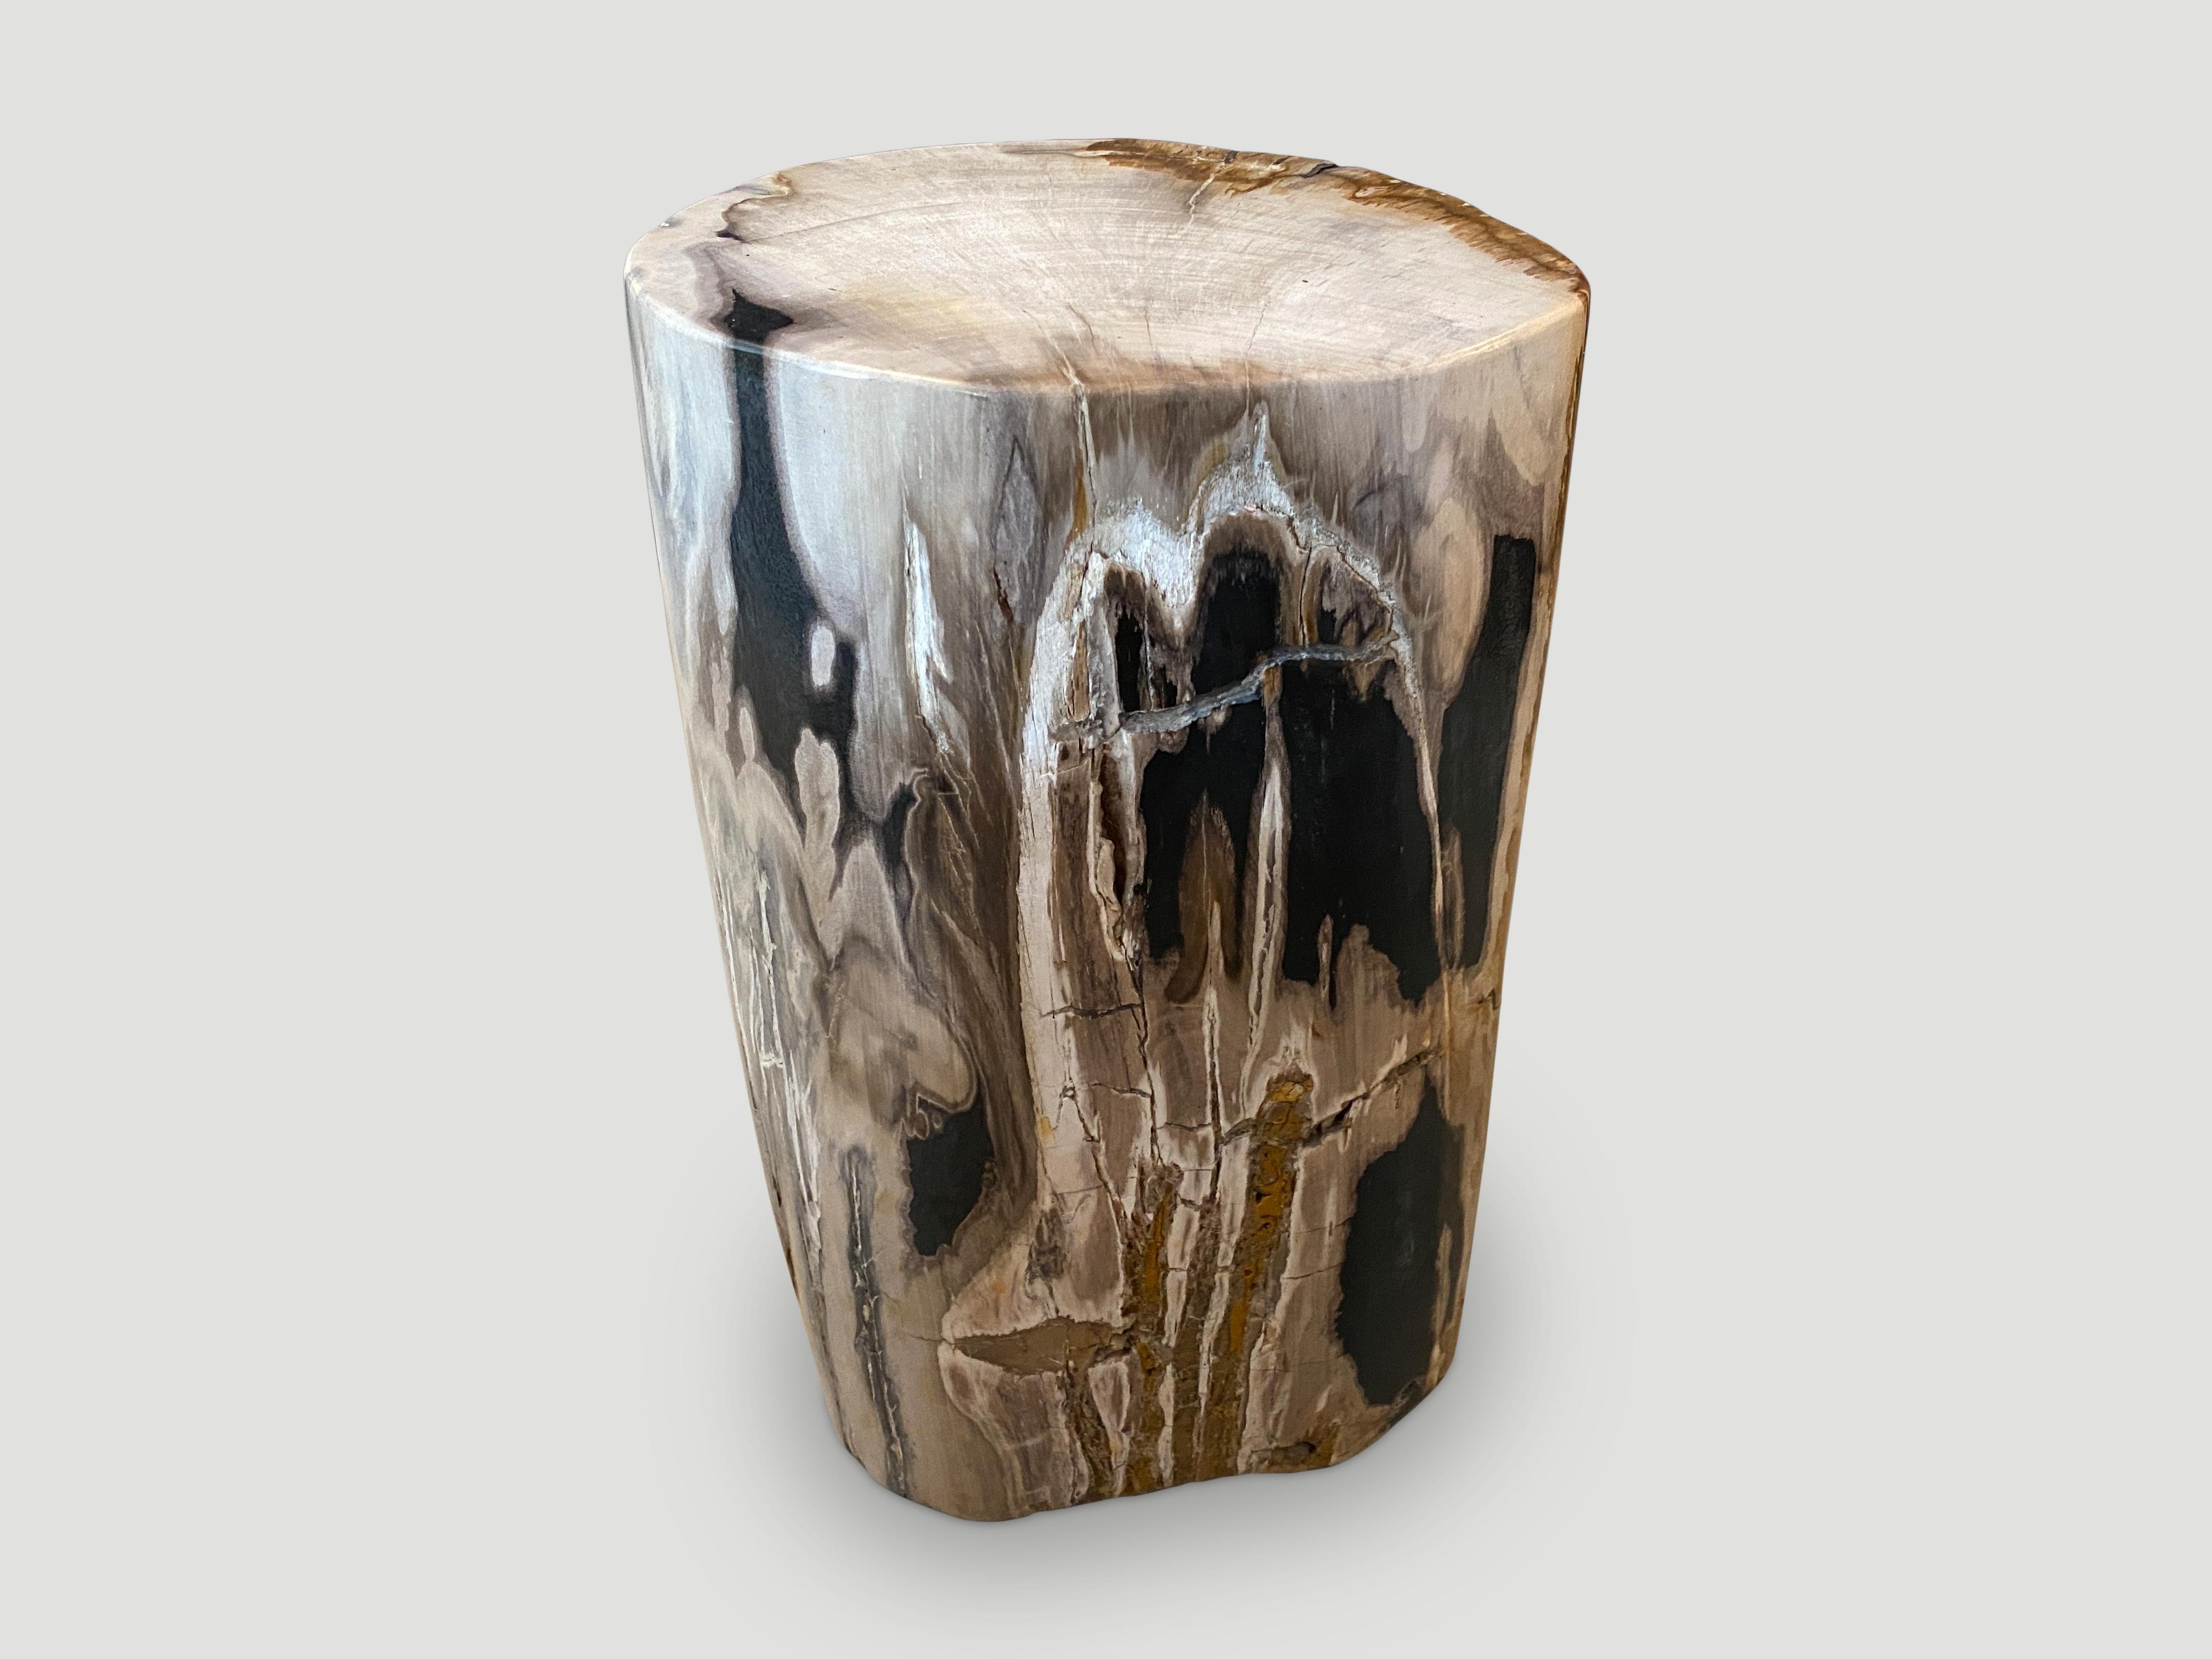 Beautiful petrified wood side table with fabulous contrasting colors yet so minimalist. It’s fascinating how Mother Nature produces these stunning 40 million year old petrified teak logs with such contrasting colors and natural patterns throughout.